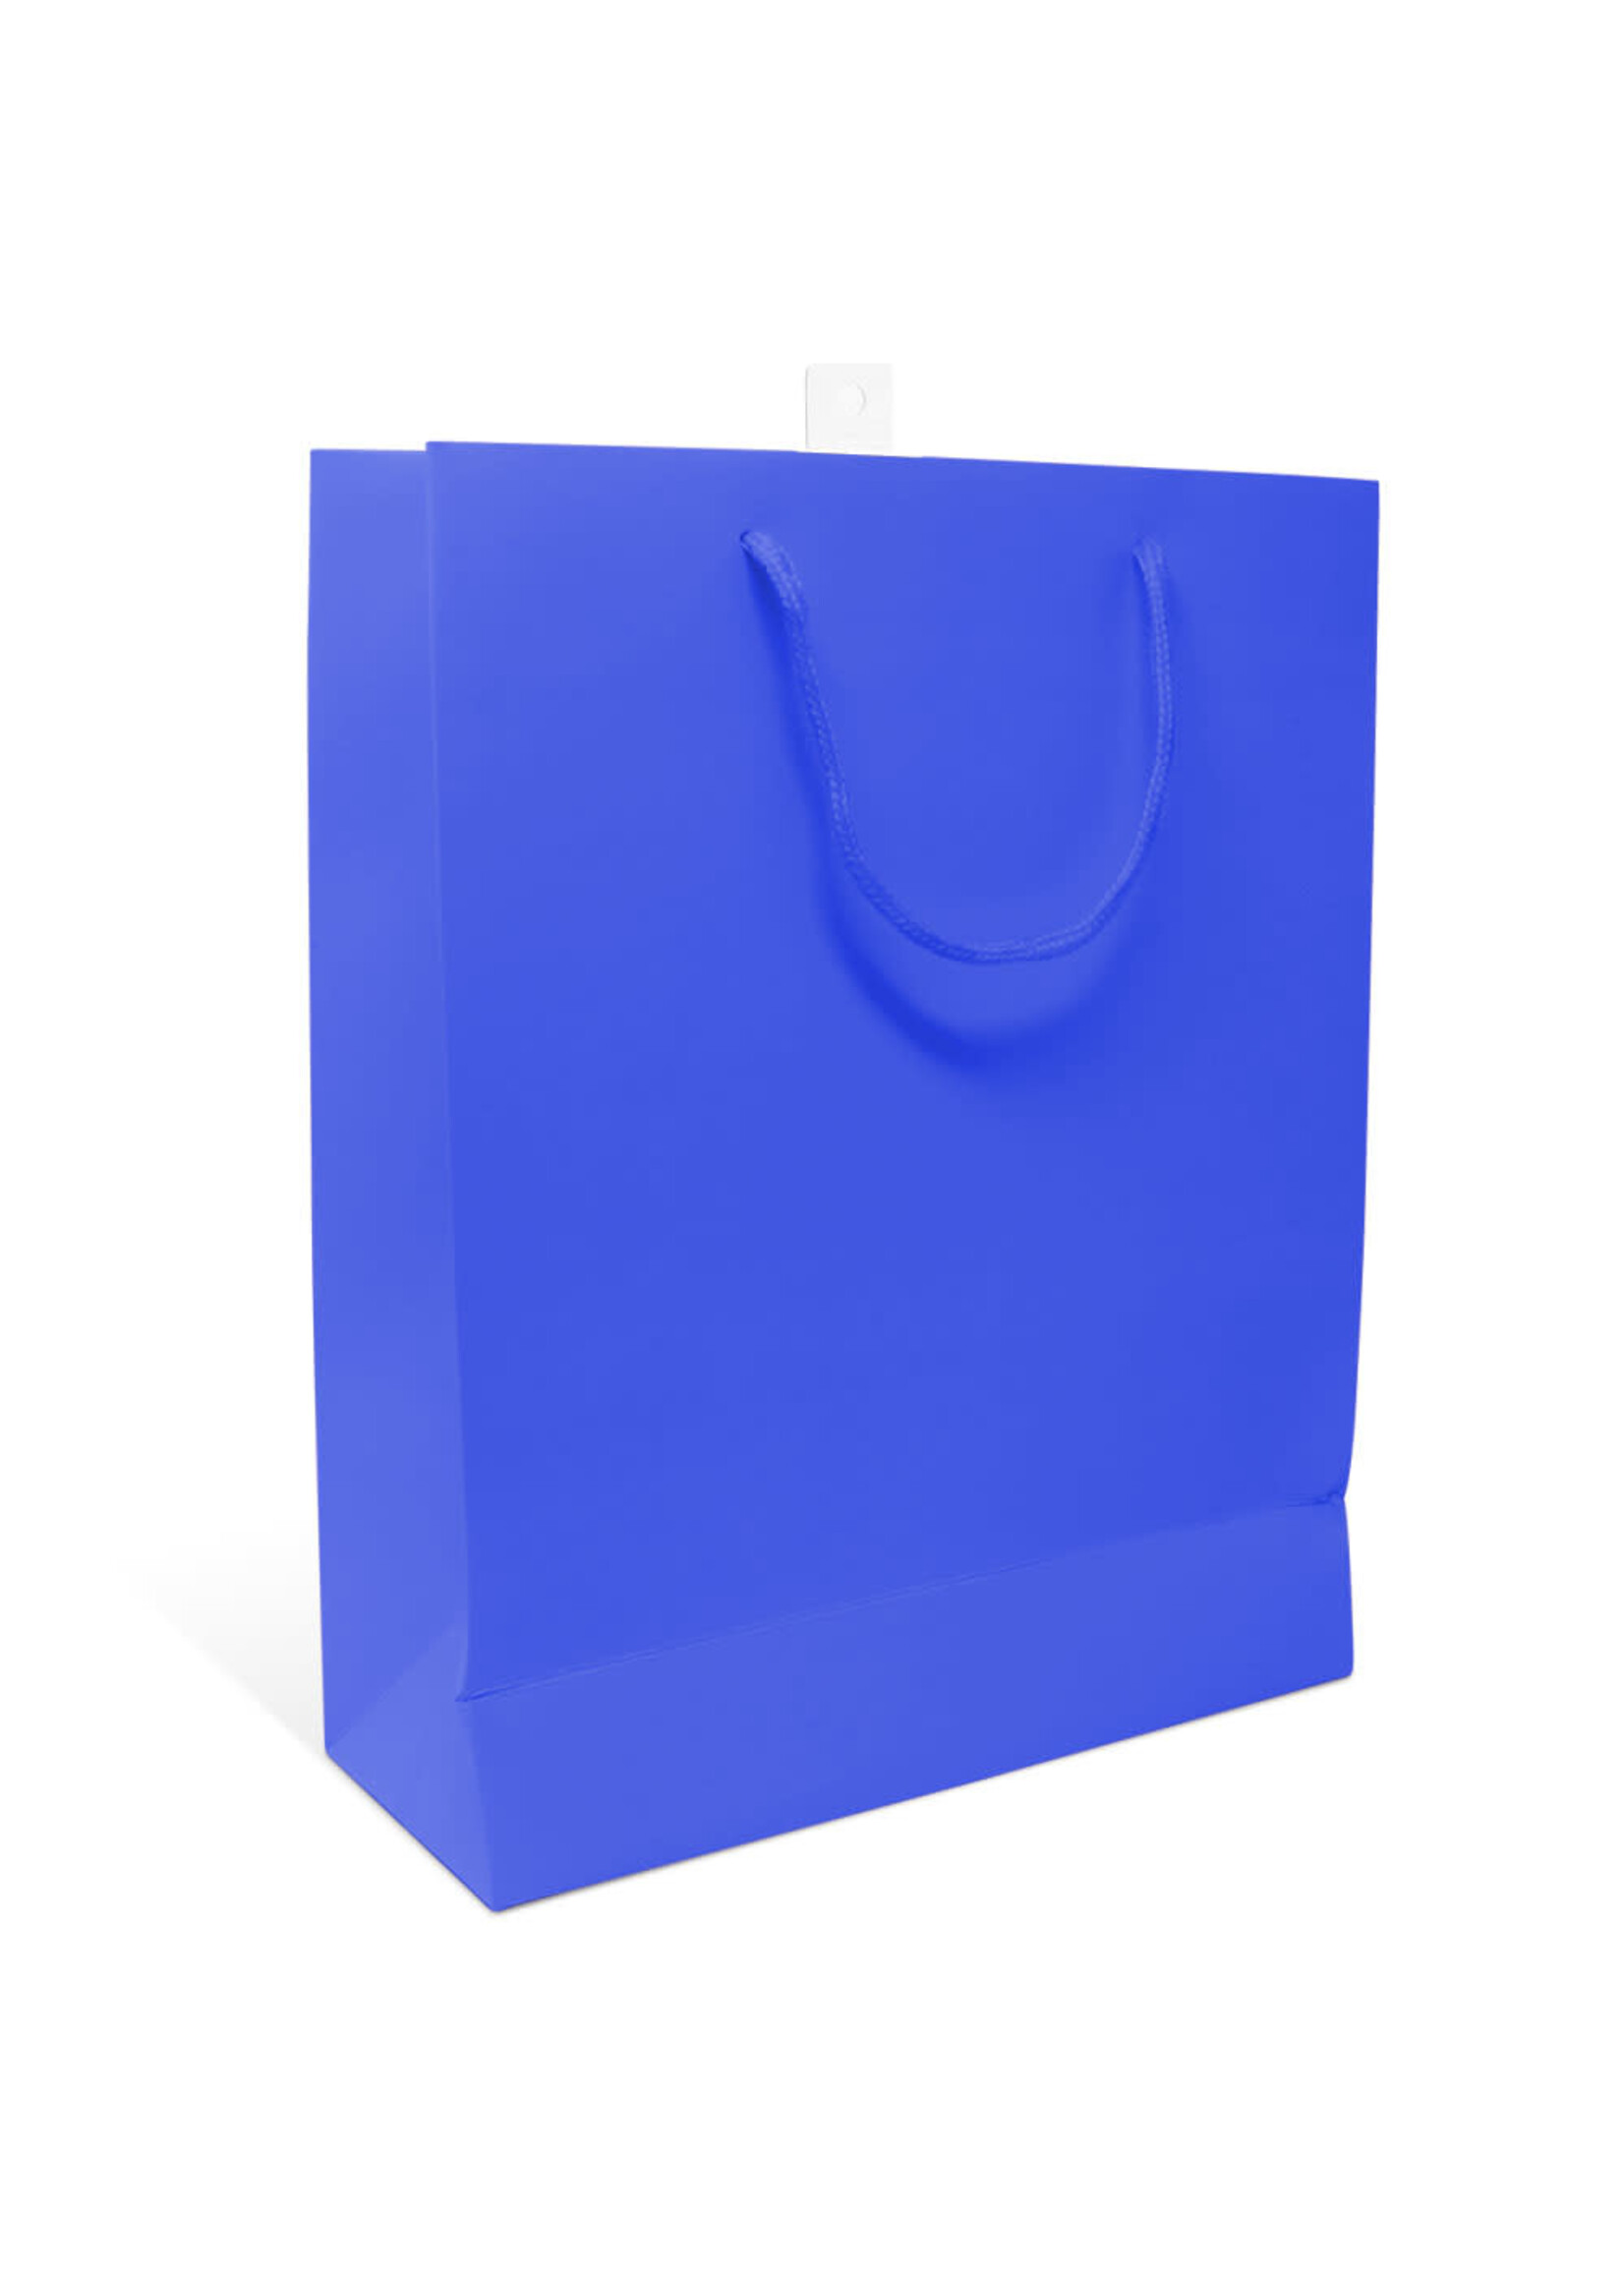 SOLID ROYAL BLUE GIFT BAGS LARGE 12" X 16.5" X 4.75"